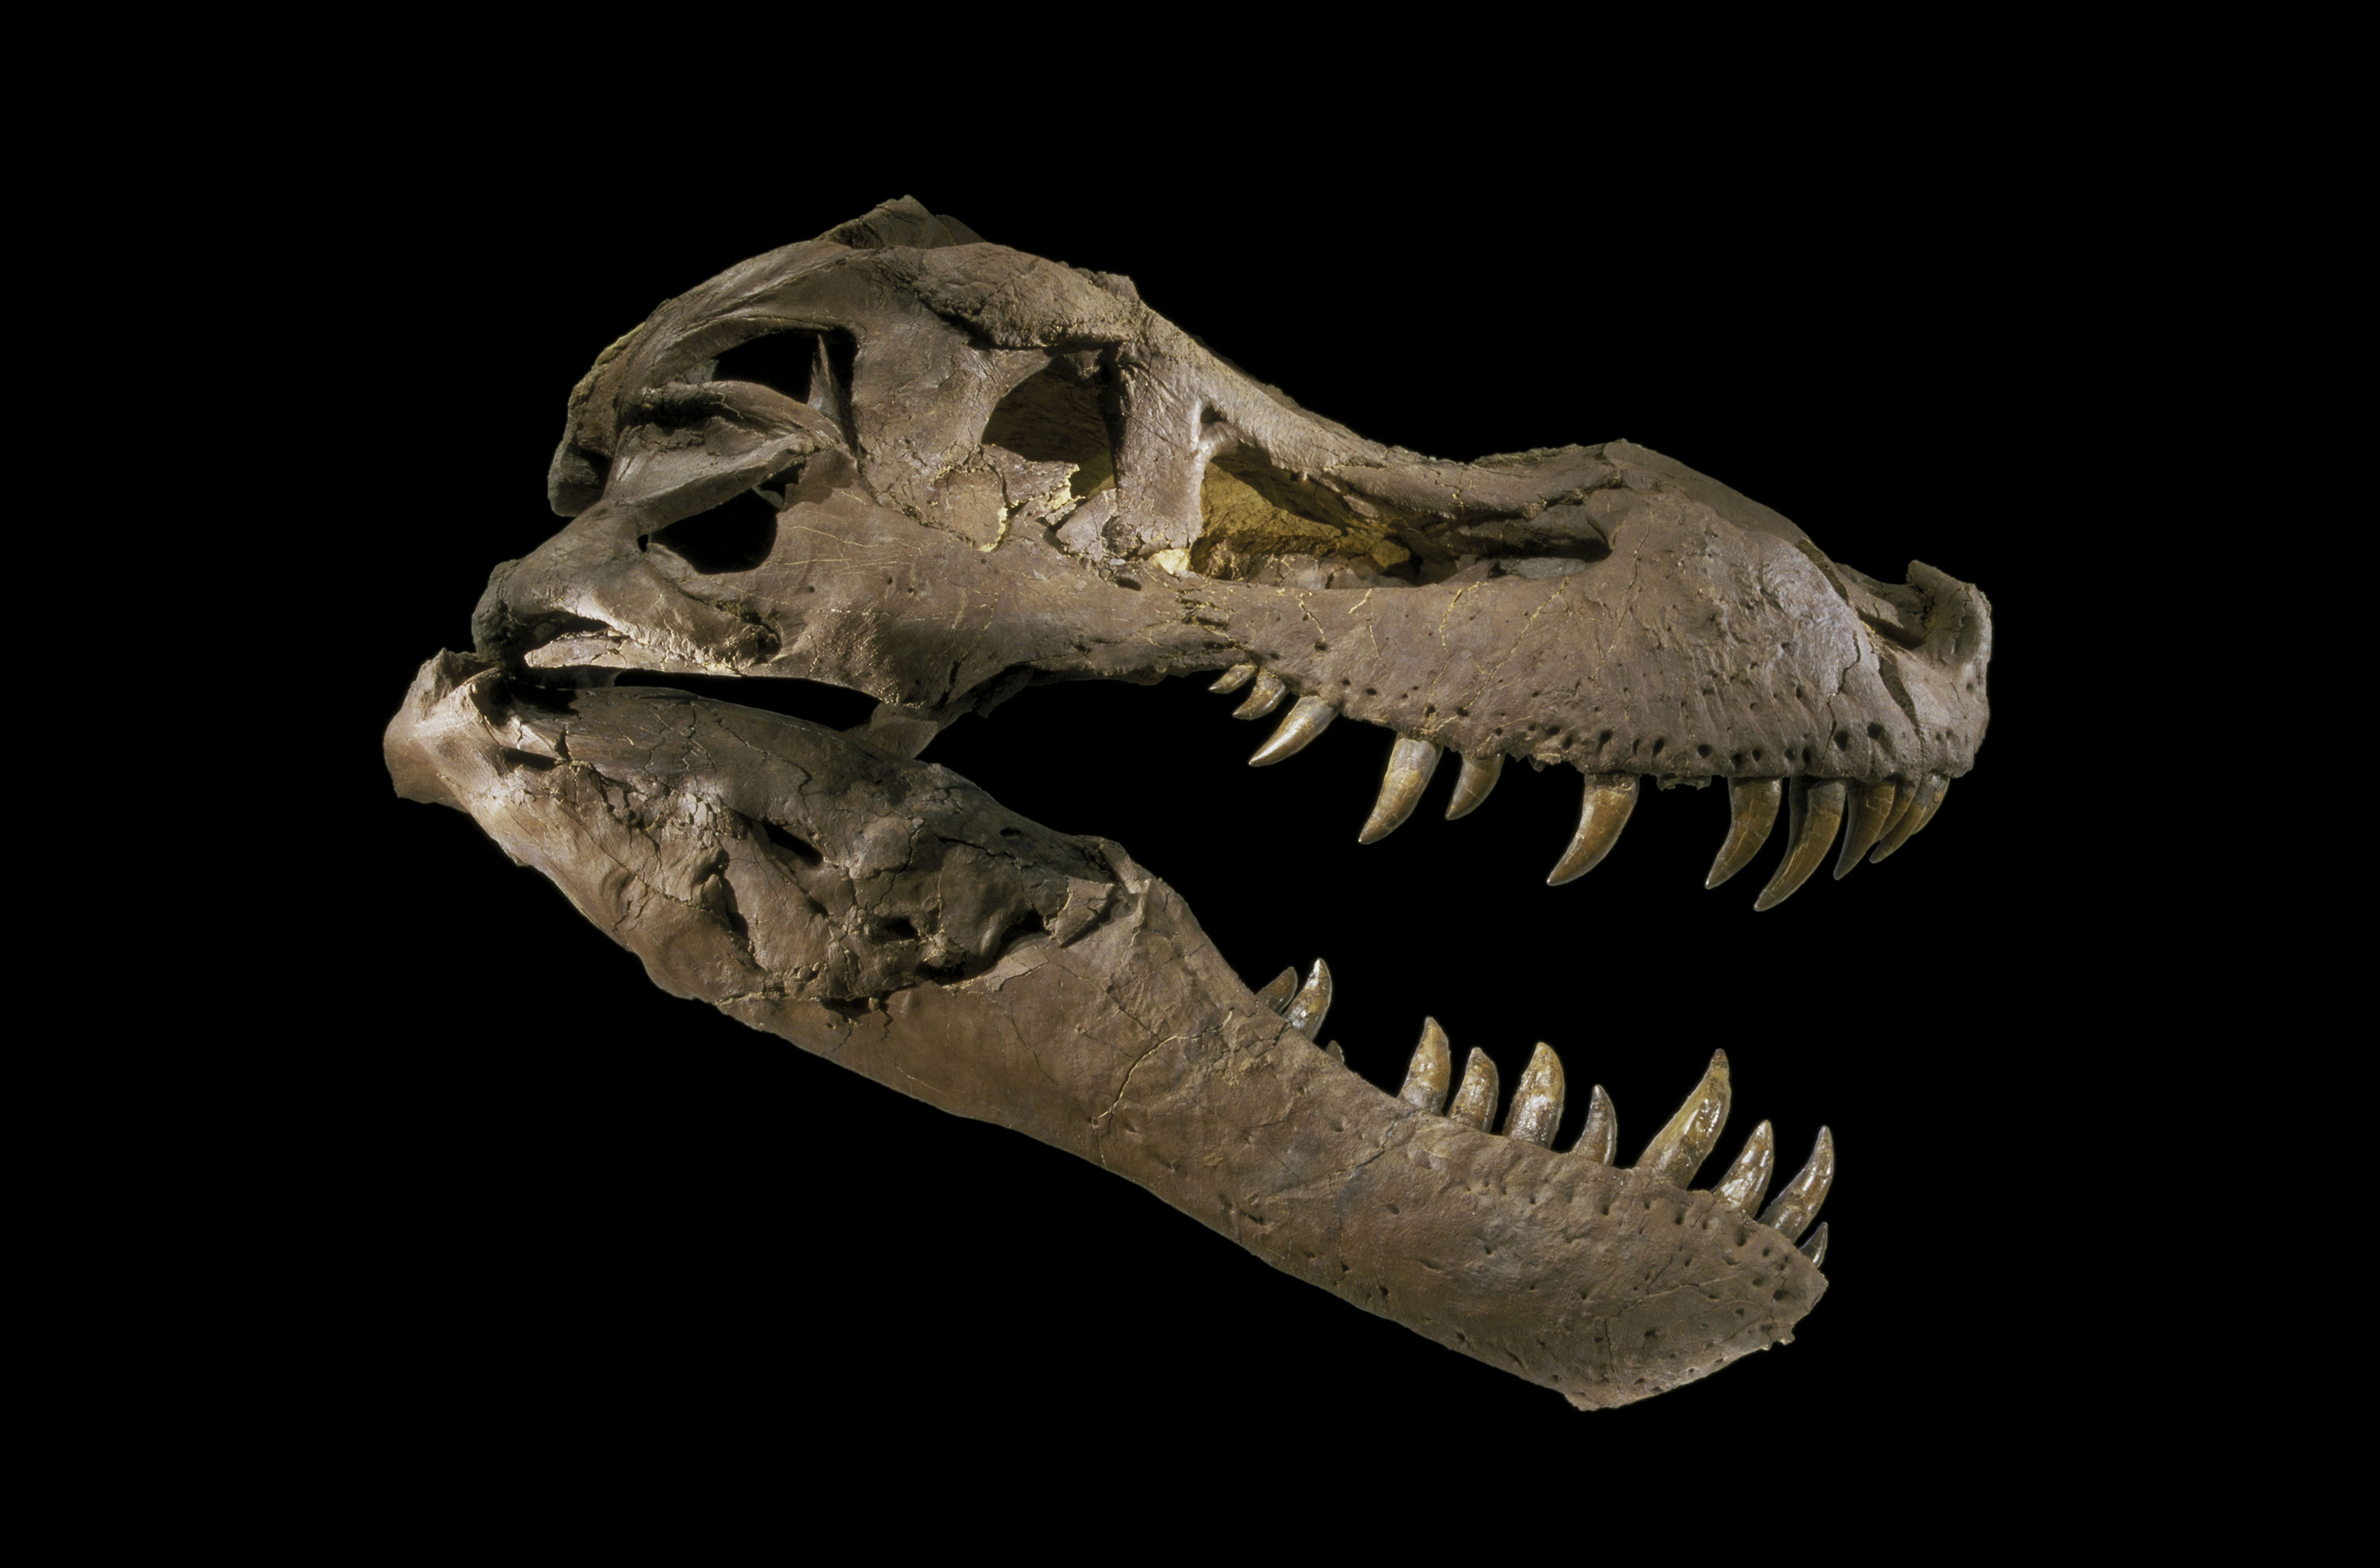 Fossilized skull of the T. rex, SUE, shown from one side.